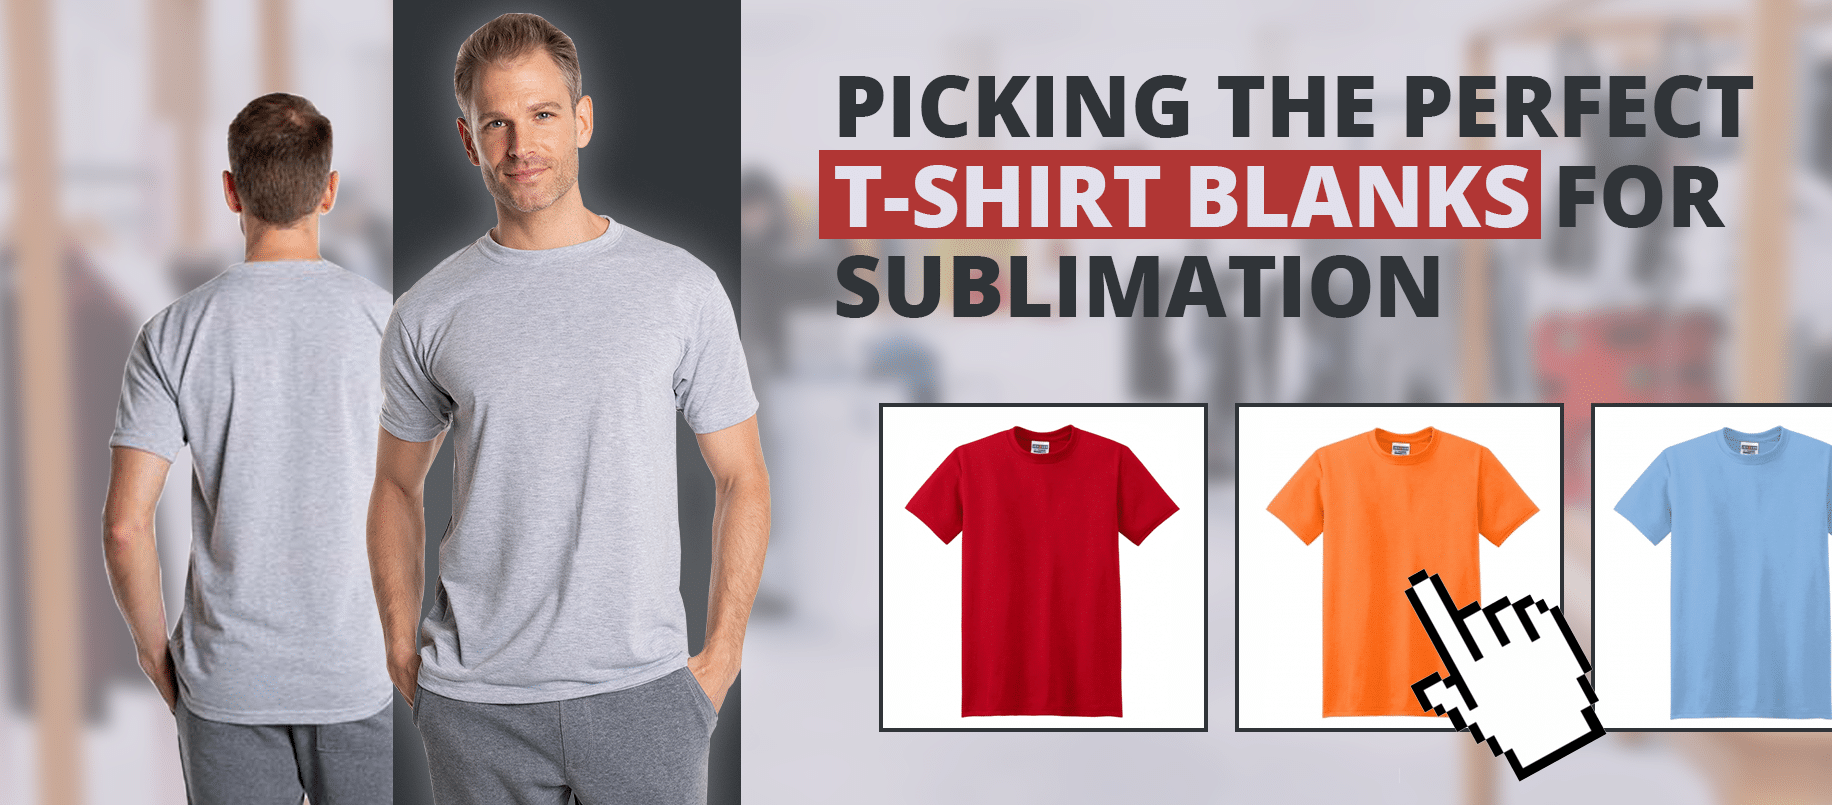 Sublimation, Equipment Bundle to Make Dark and Light Shirts on Cotton**